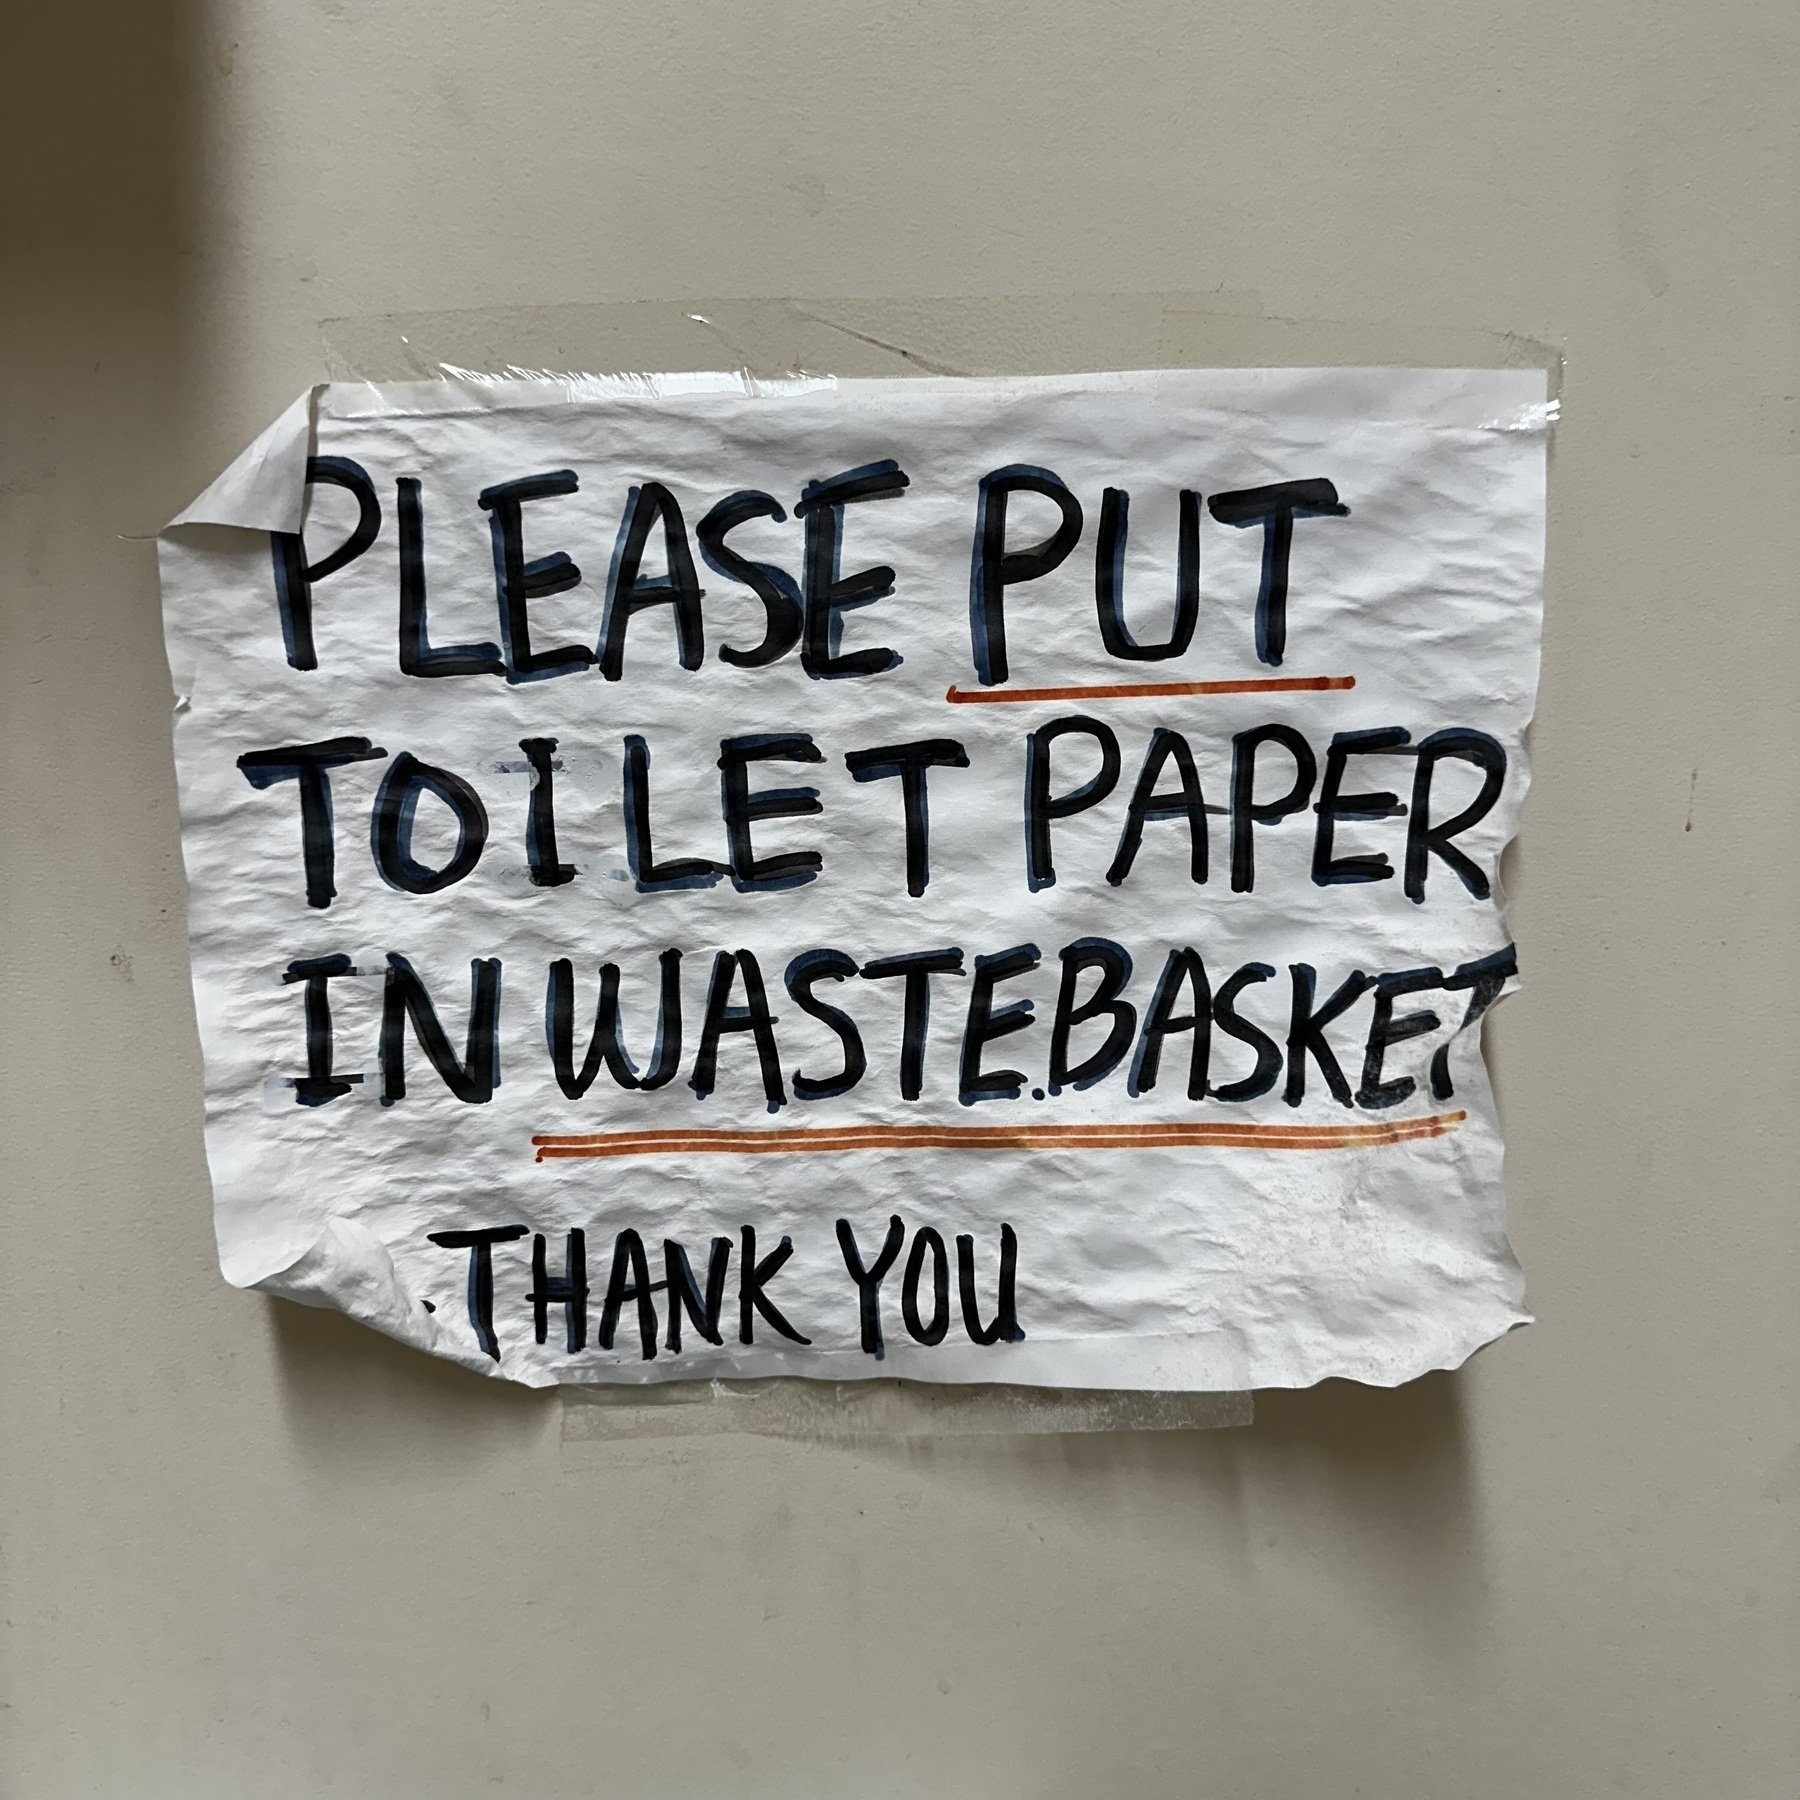 Bathroom sign that reads: please put toilet paper in the wastebasket. Thank you.